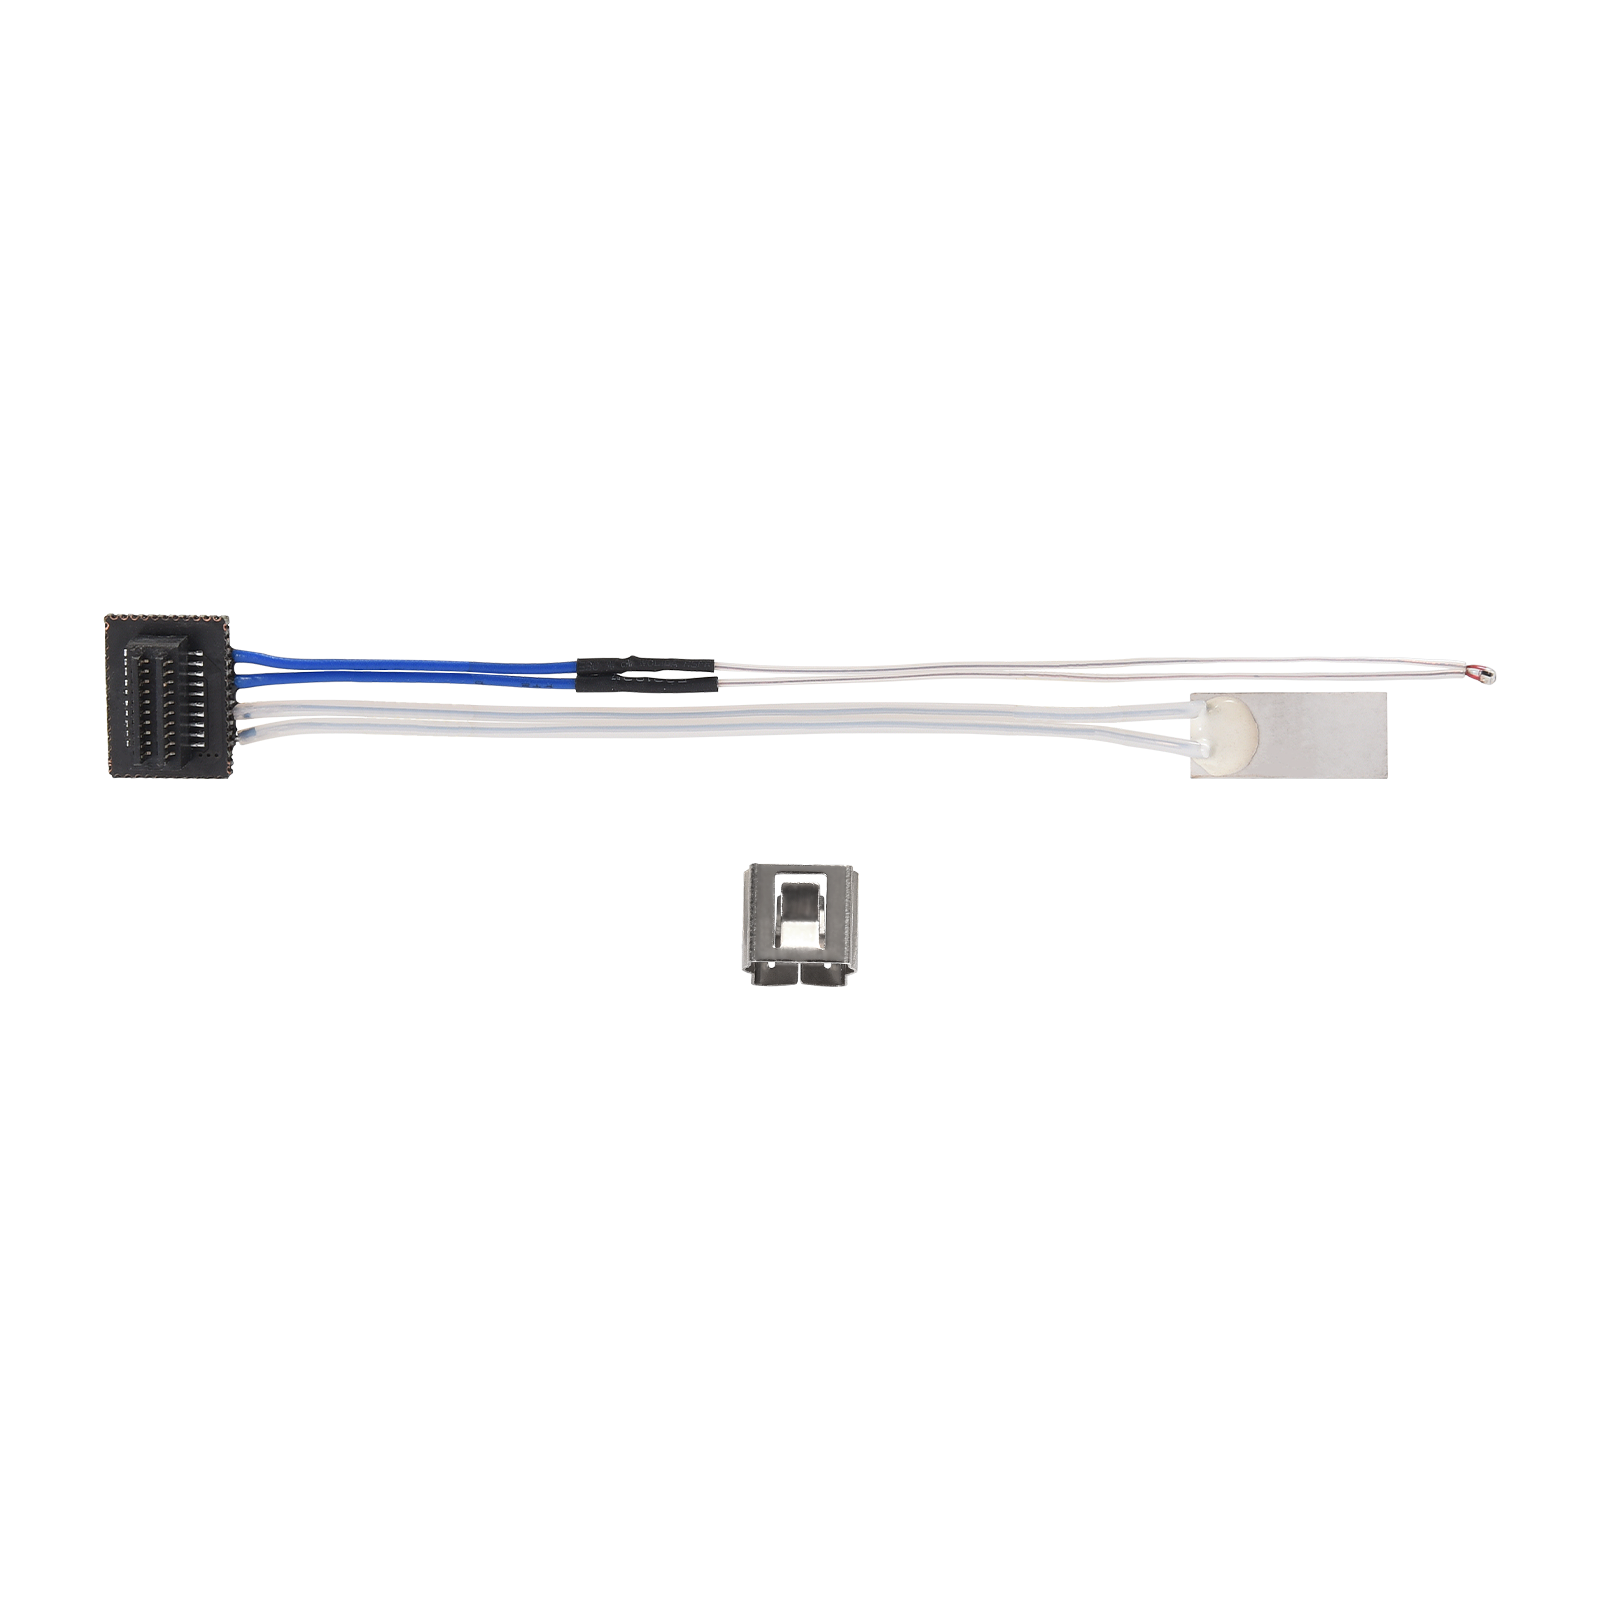 Ceramic Heater Thermistor 48W Upgrade Kit 300℃ High Temperature Sensor with 2pc Fixing Clip Compatible with Bambu Lab P1P and P1S Printers